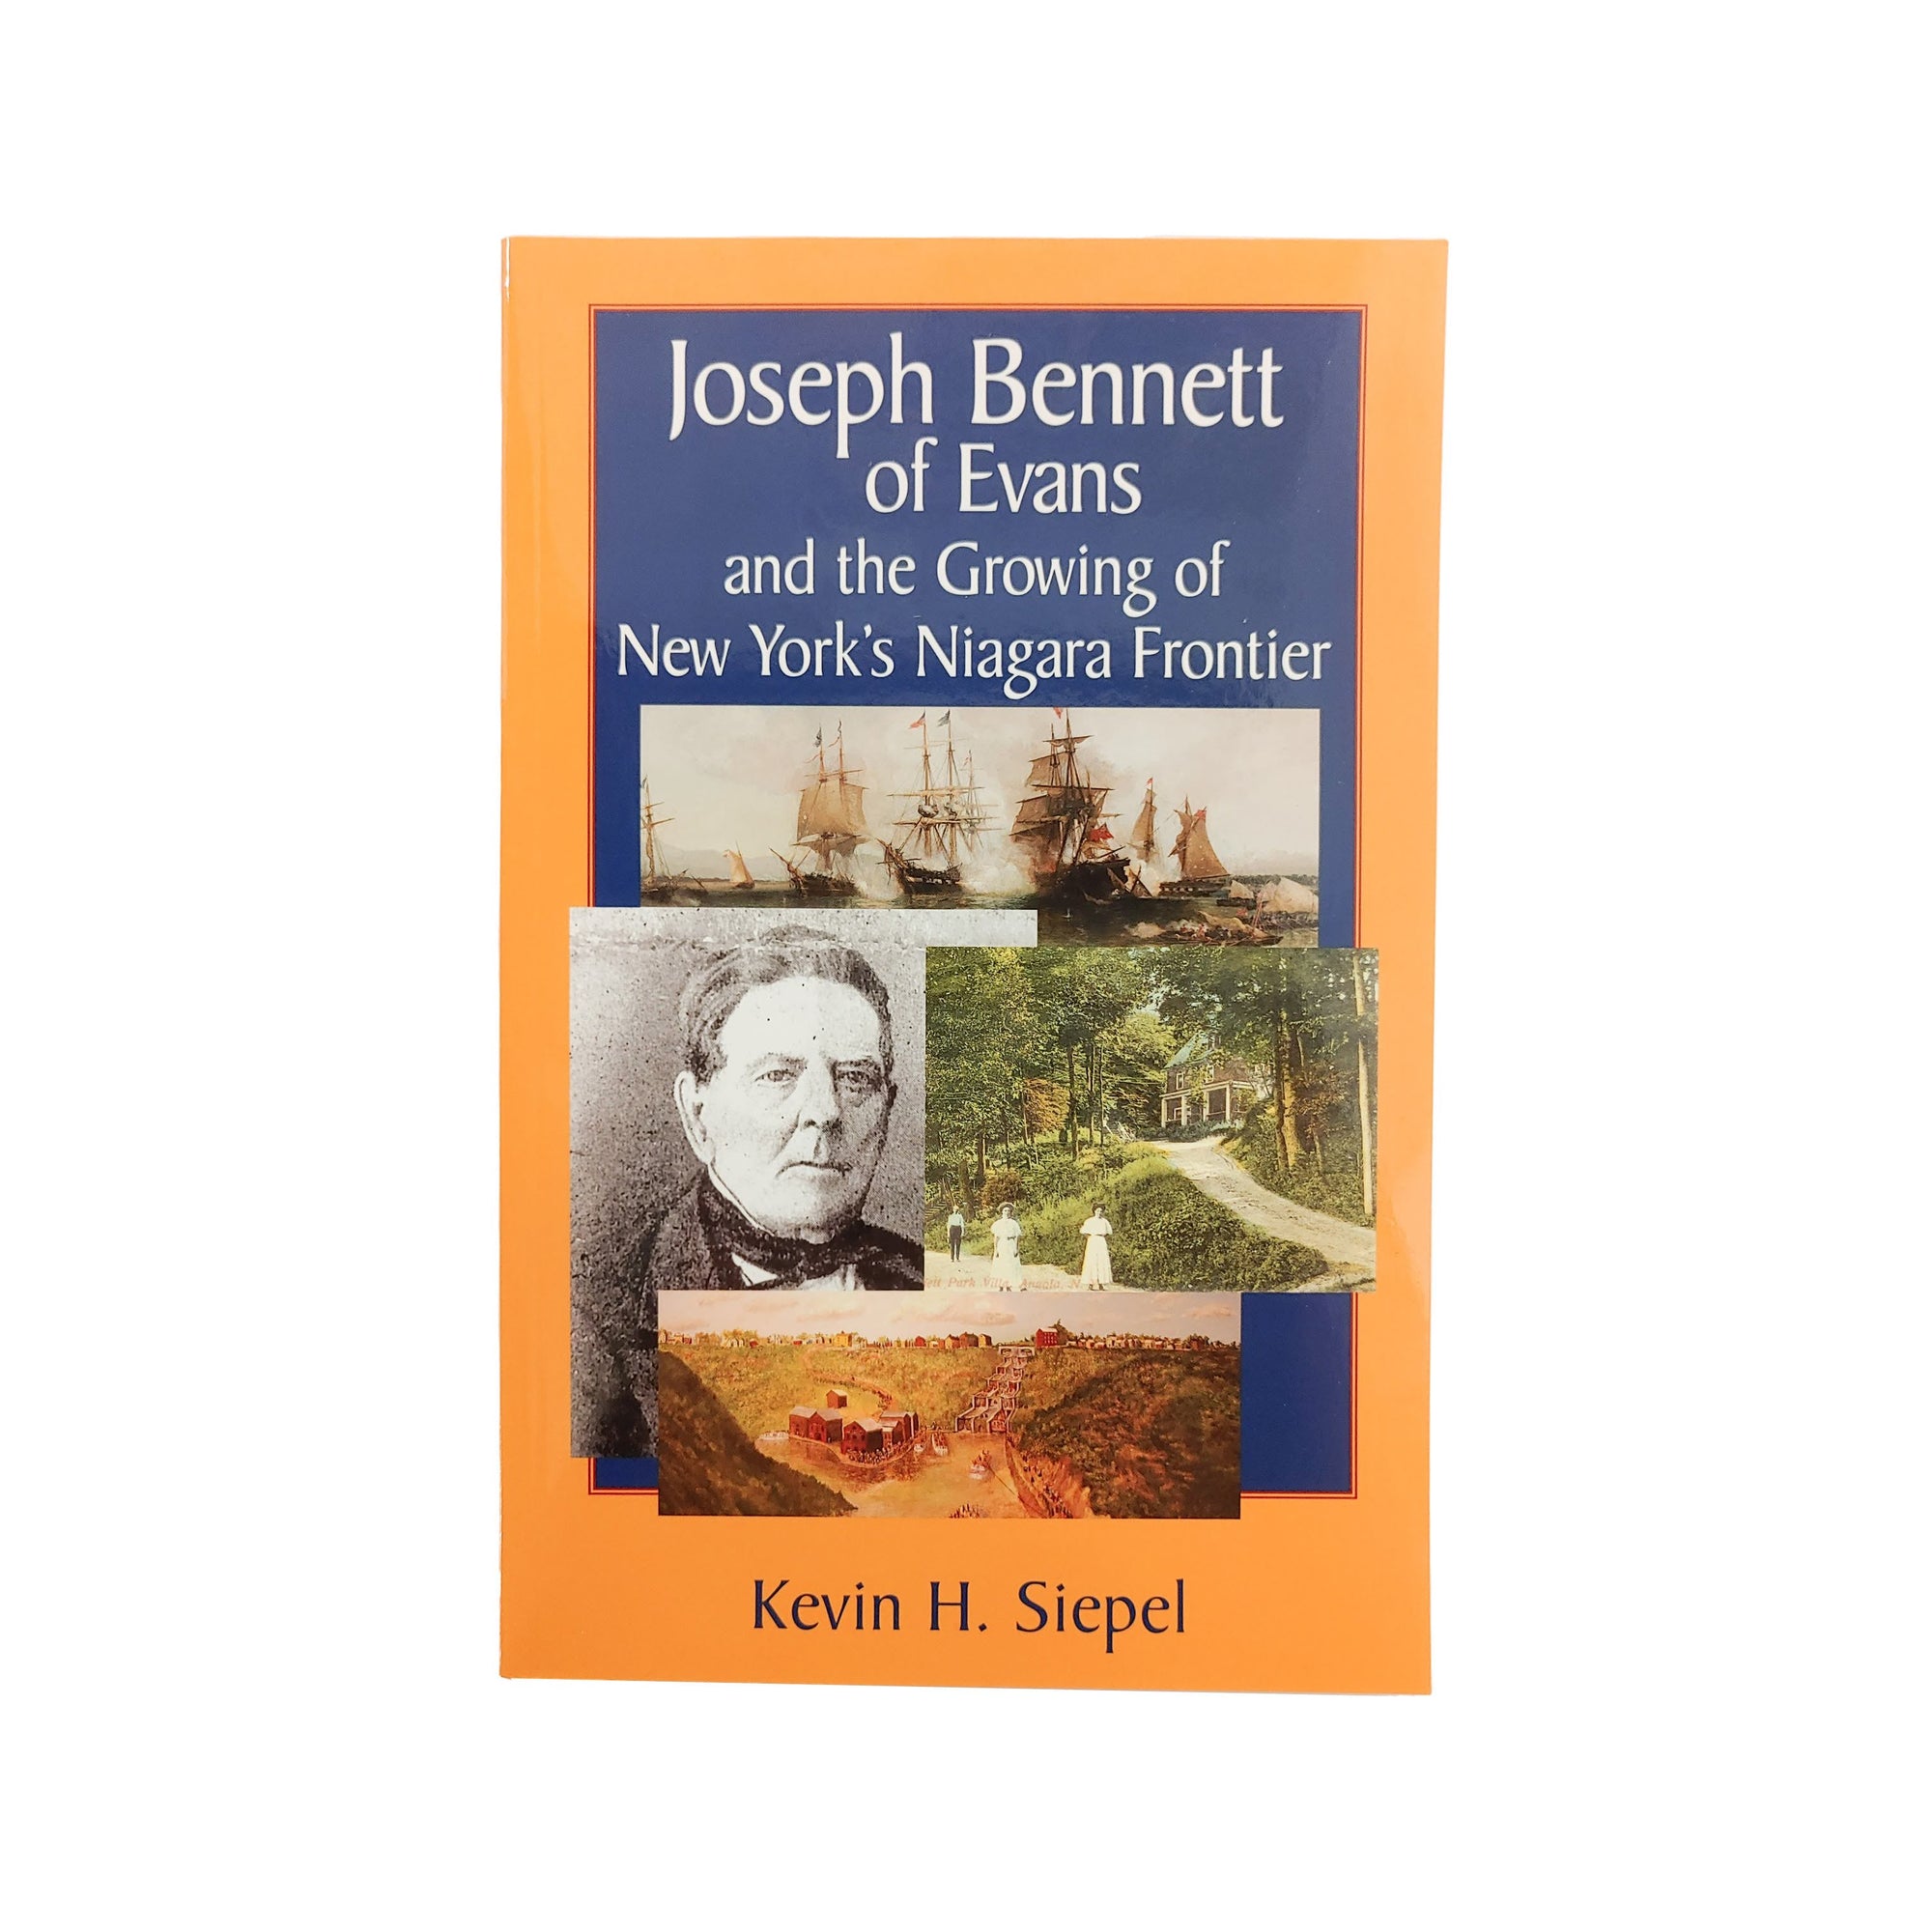 bflo store joseph bennett of evans and the growing of new yorks niagara frontier book